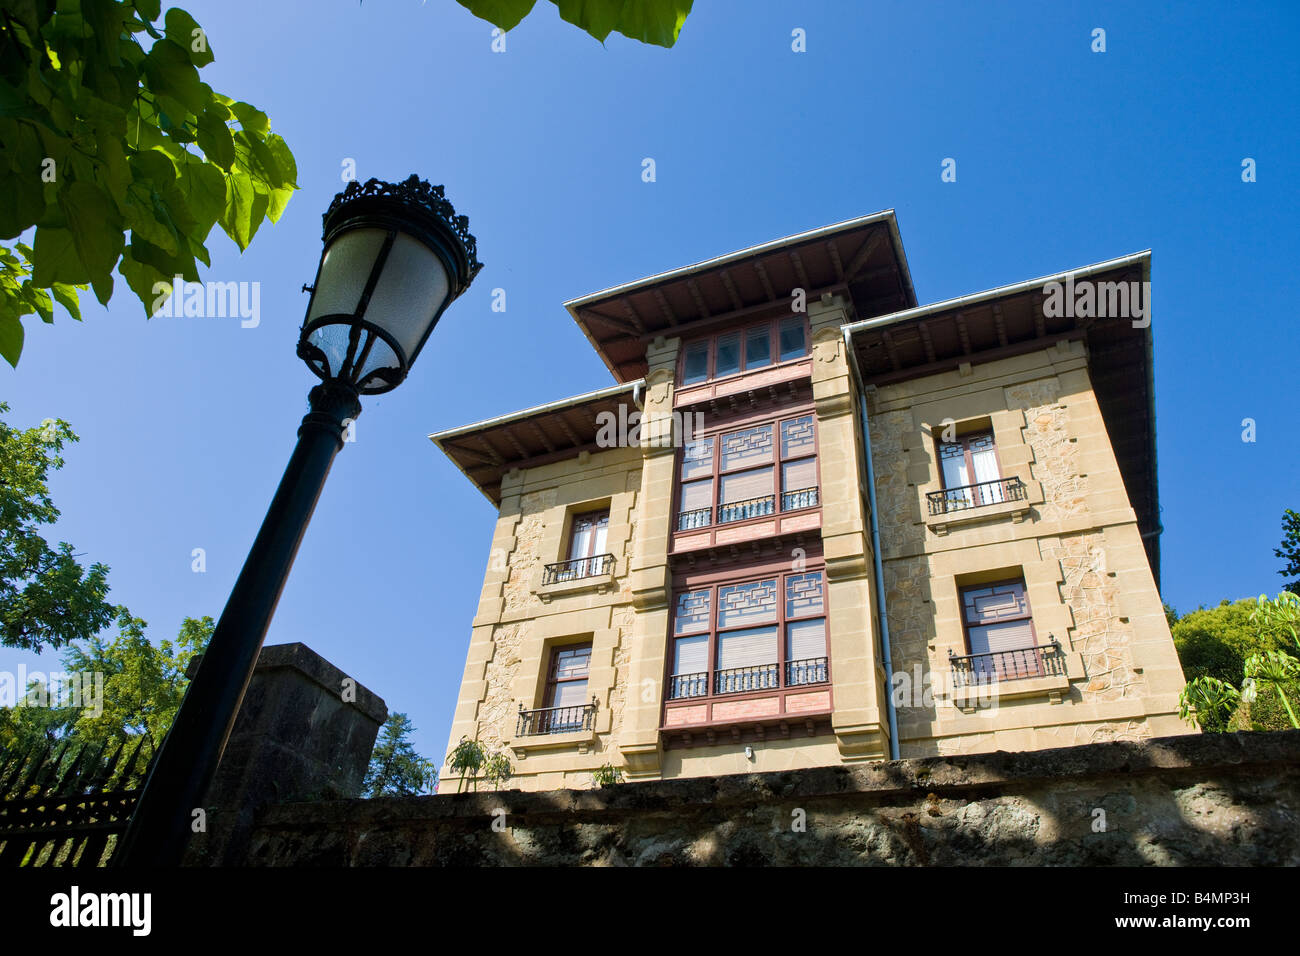 Architectural style in Guernica, Spain Stock Photo